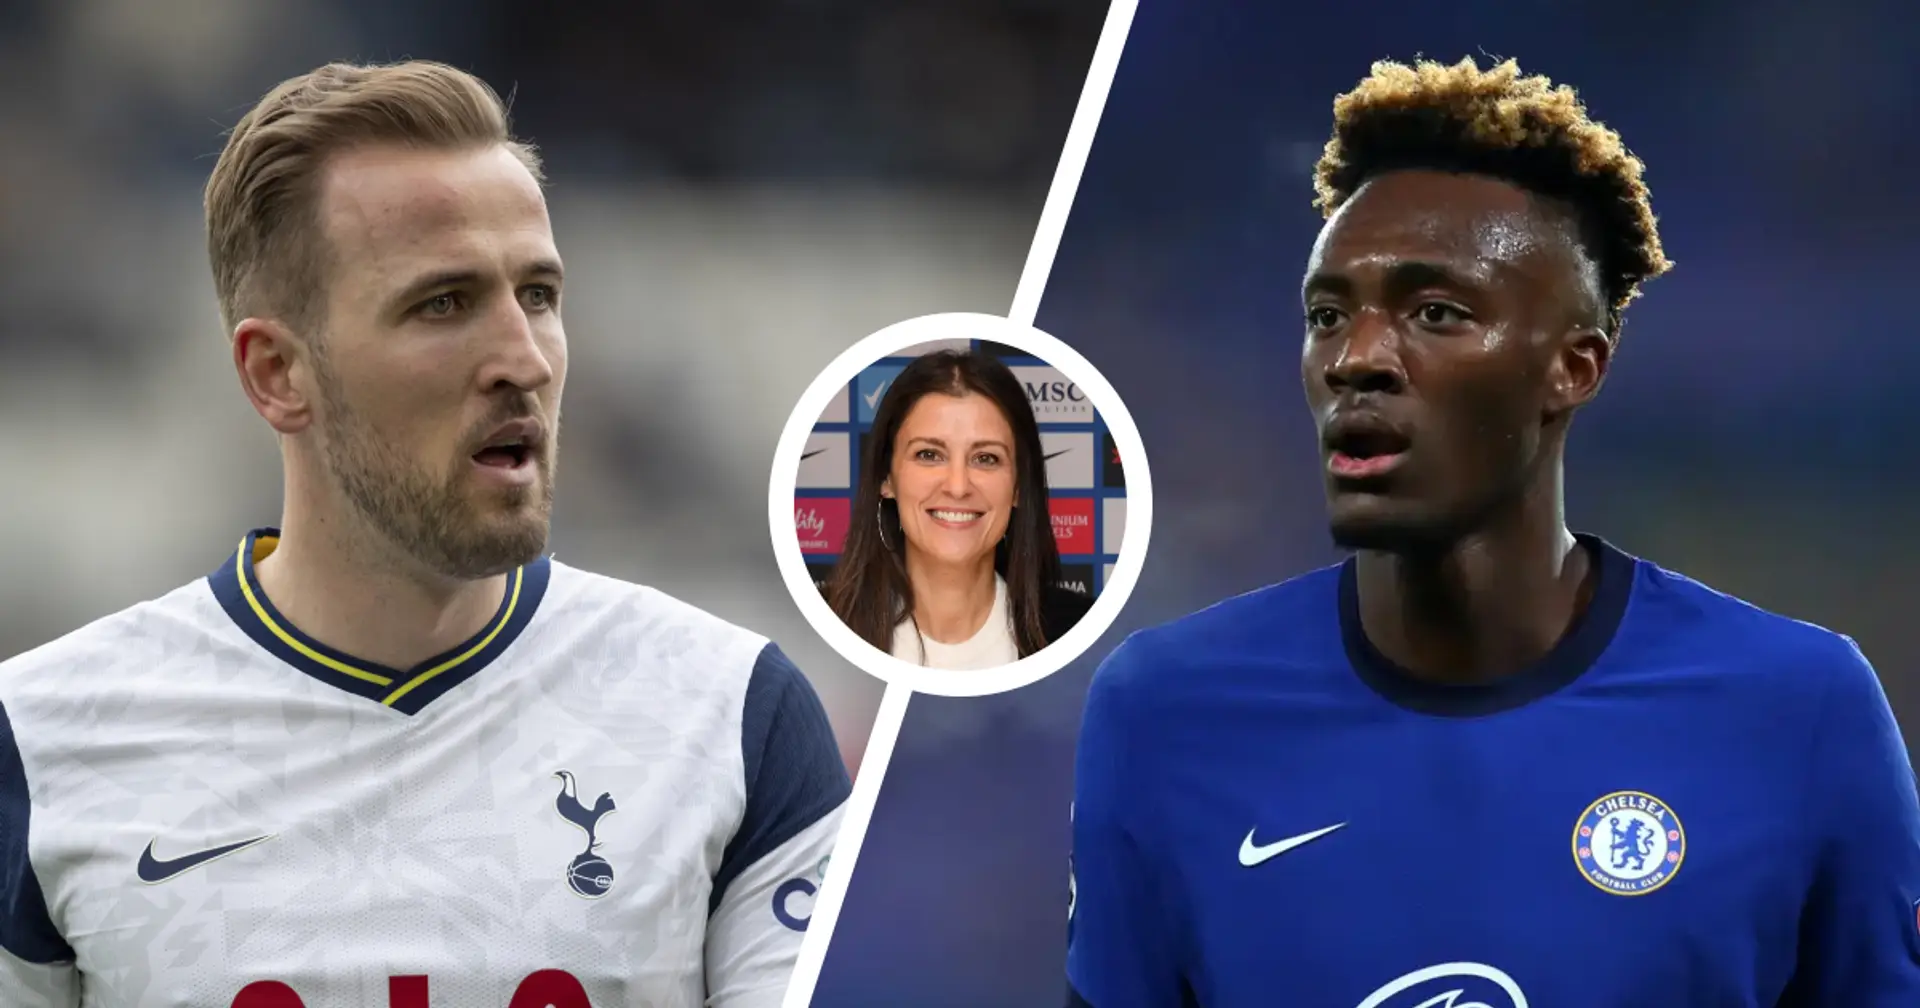 Chelsea have sought to 'establish intentions' with Kane, Abraham possibly included in any offer: The Athletic (reliability: 5 stars)